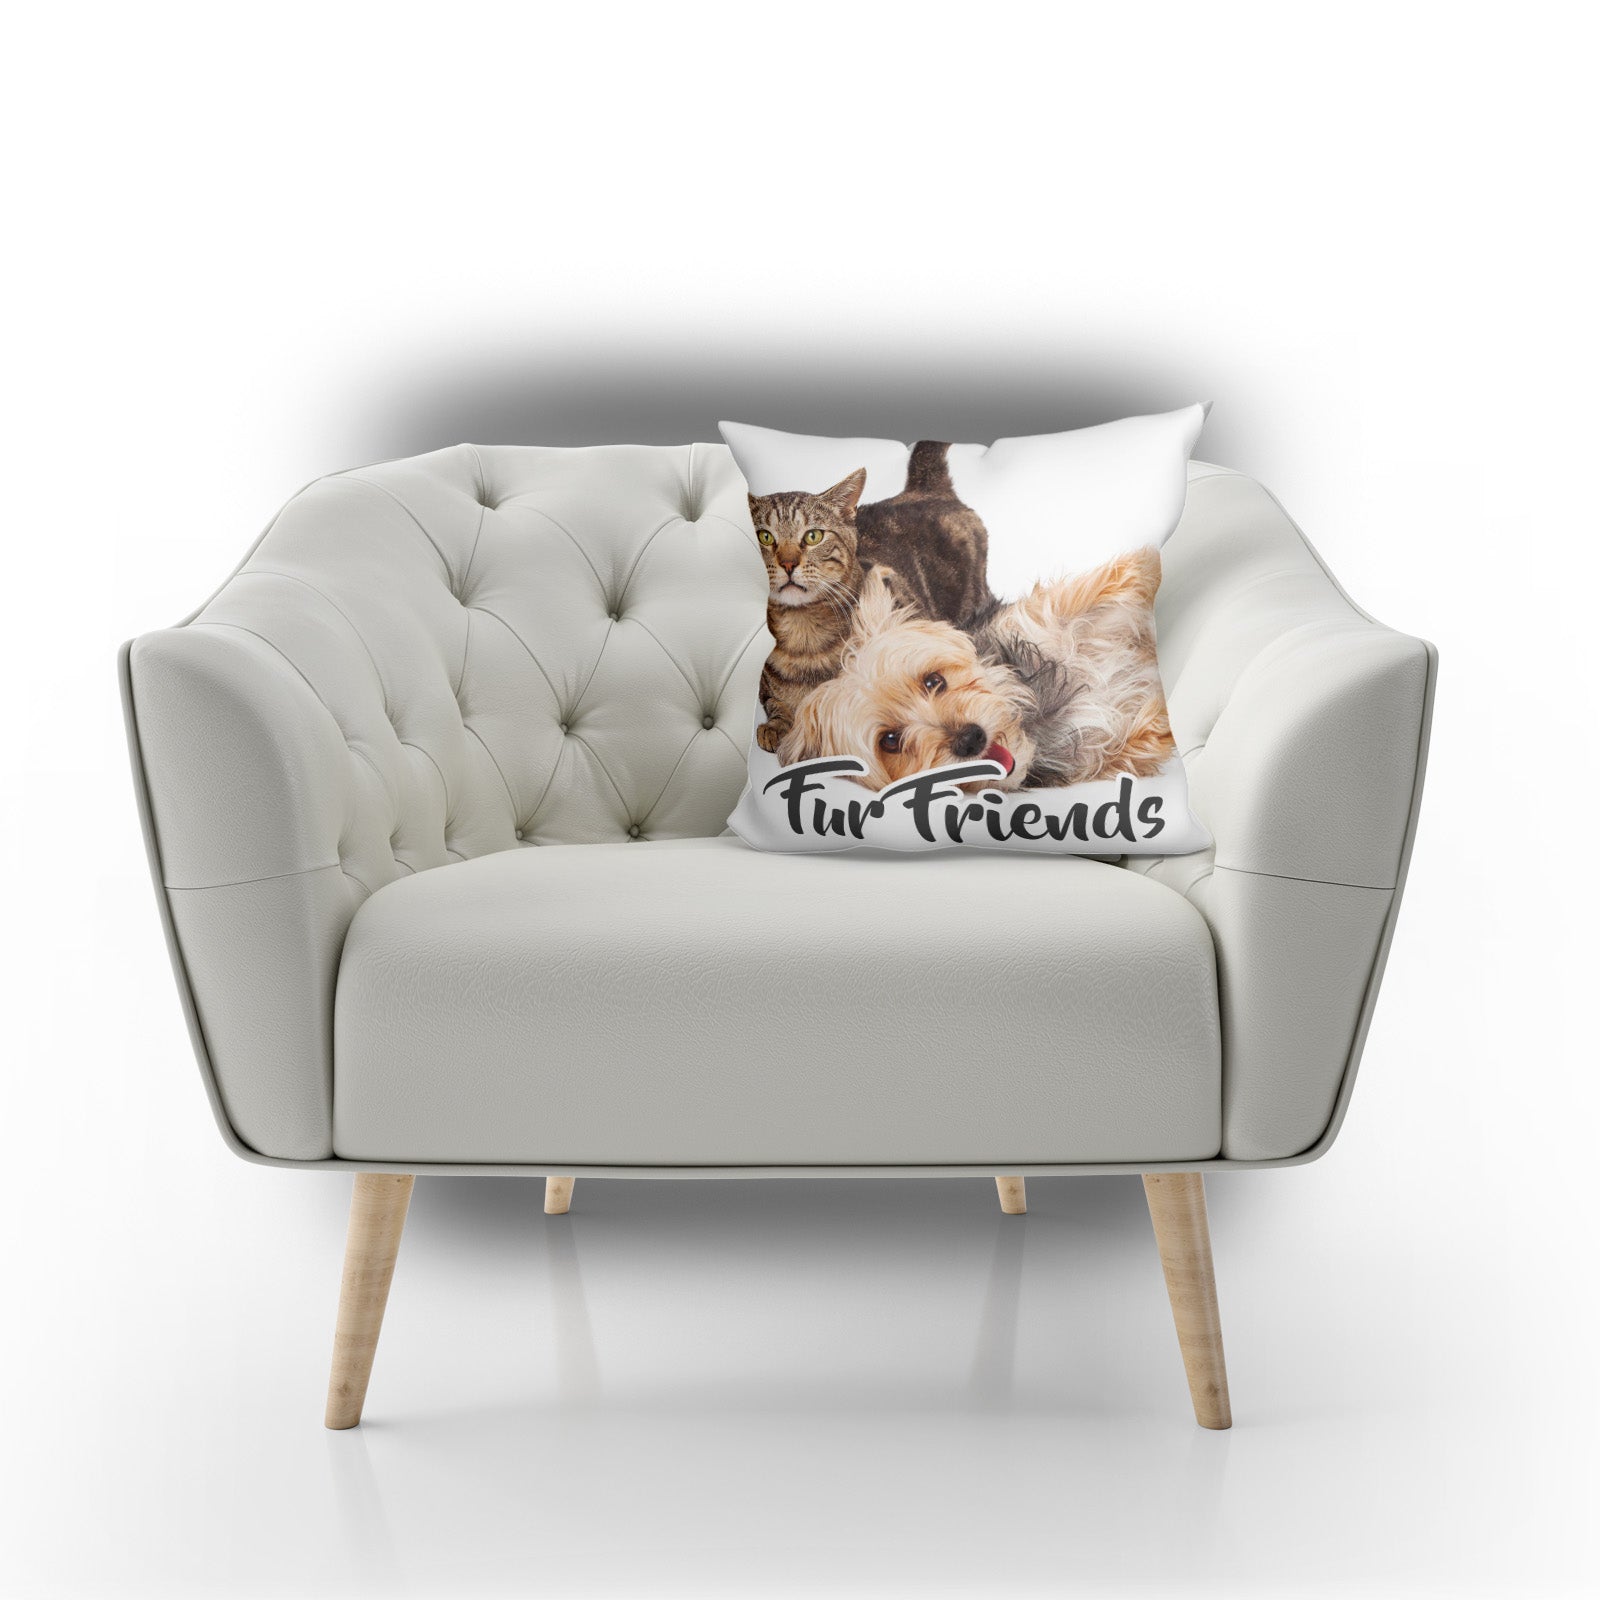 Fur Friends Custom Photo Pillow with Text Overlay